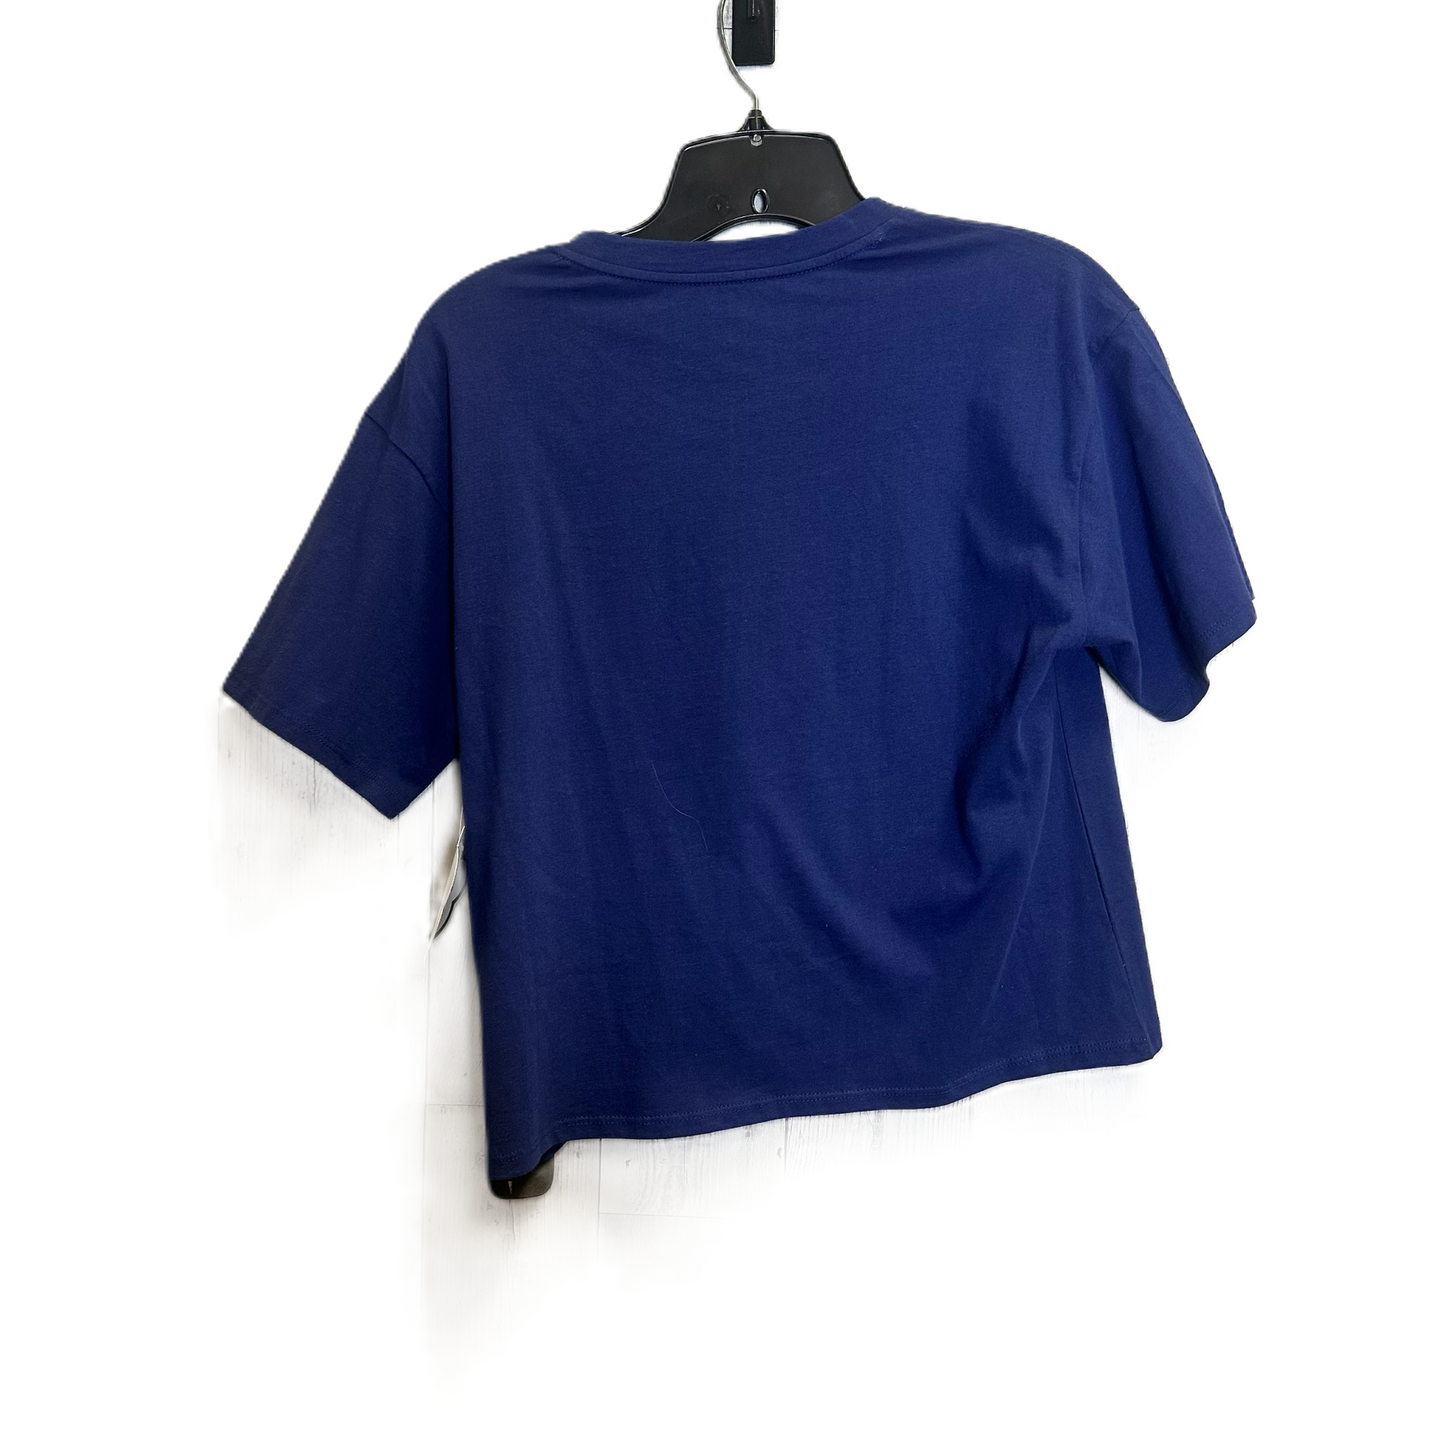 Navy Top Short Sleeve Basic By Clothes Mentor, Size: S